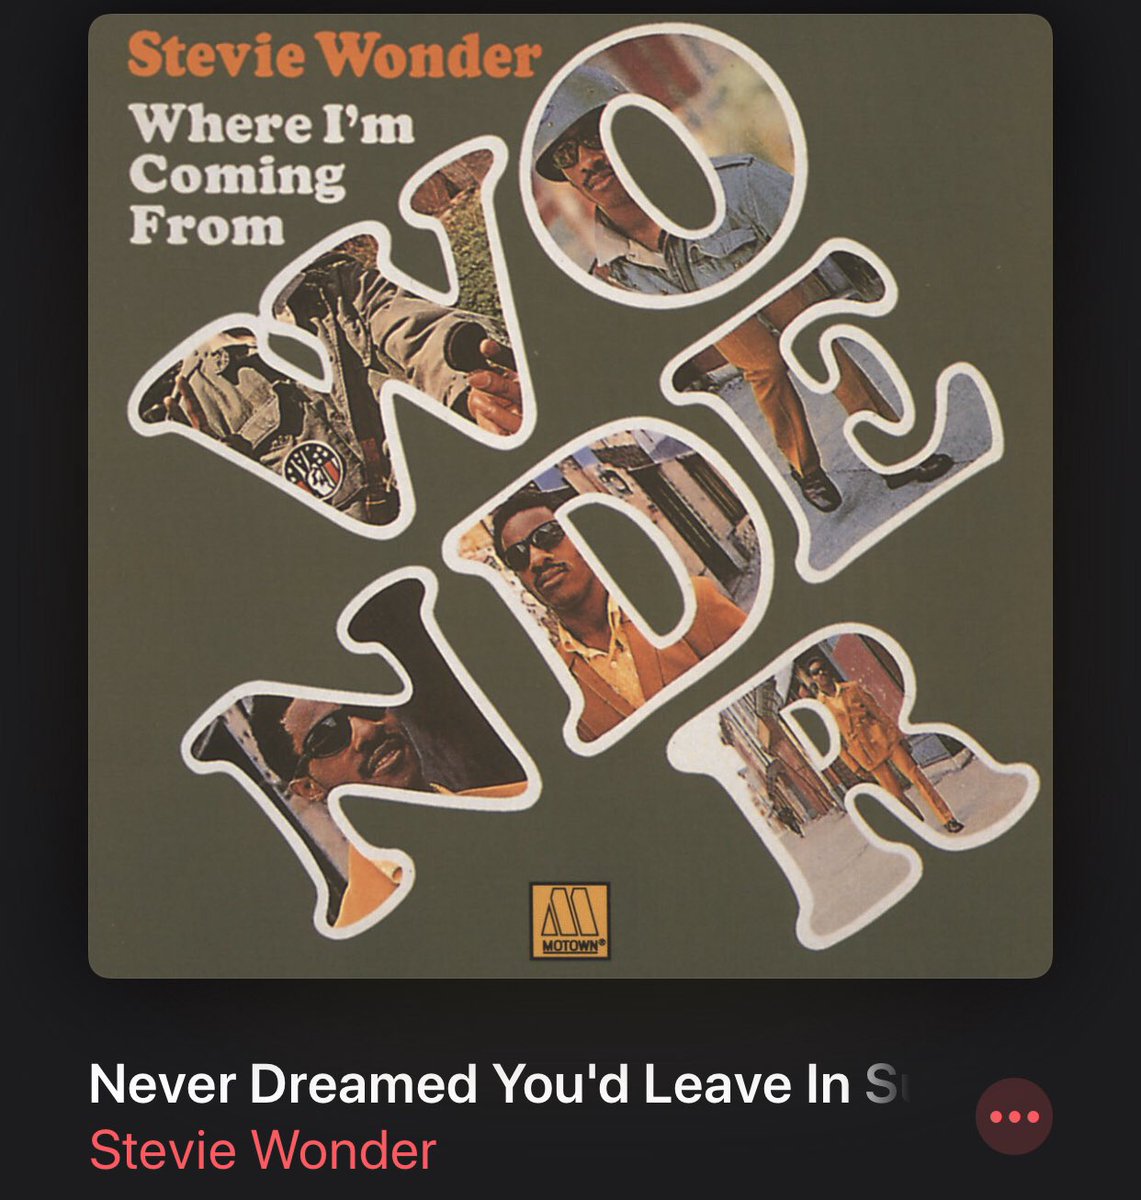 Okay, the heartbreak song of all heartbreak songs. “I Never Dreamed You’d Leave in Summer” is short, but it’s a damn gut punch about love loss.